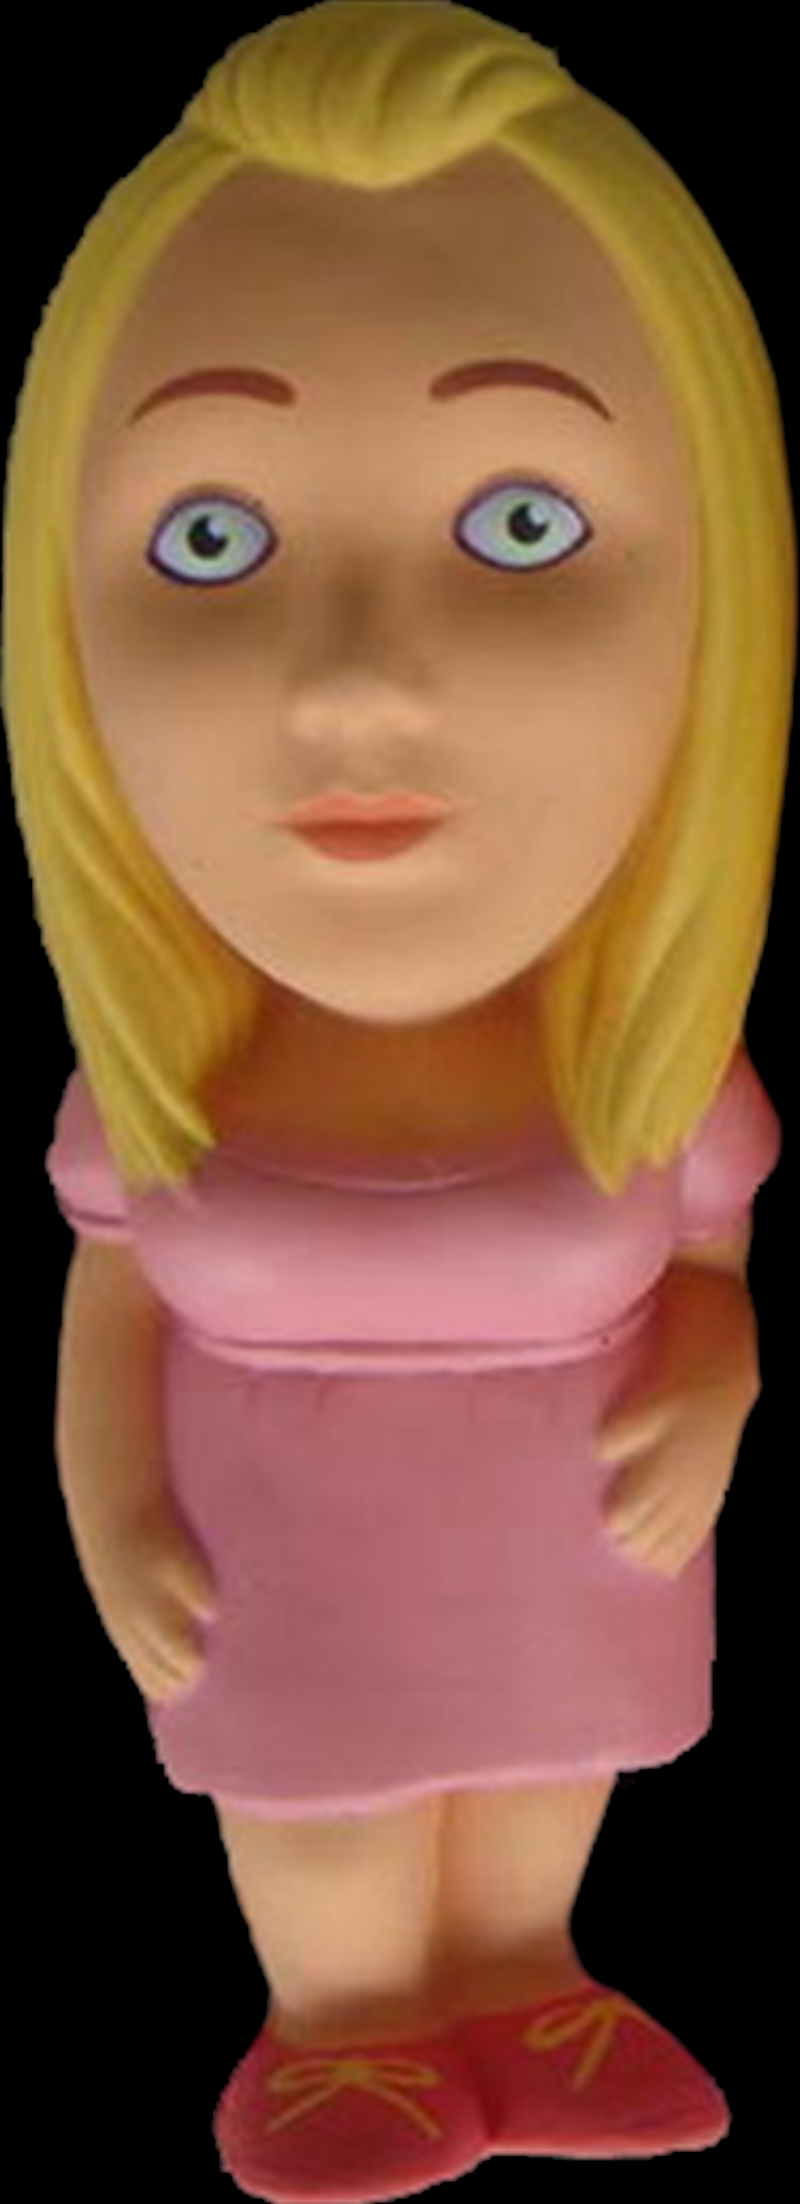 The Big Bang Theory - Penny Stress Doll | Merchandise